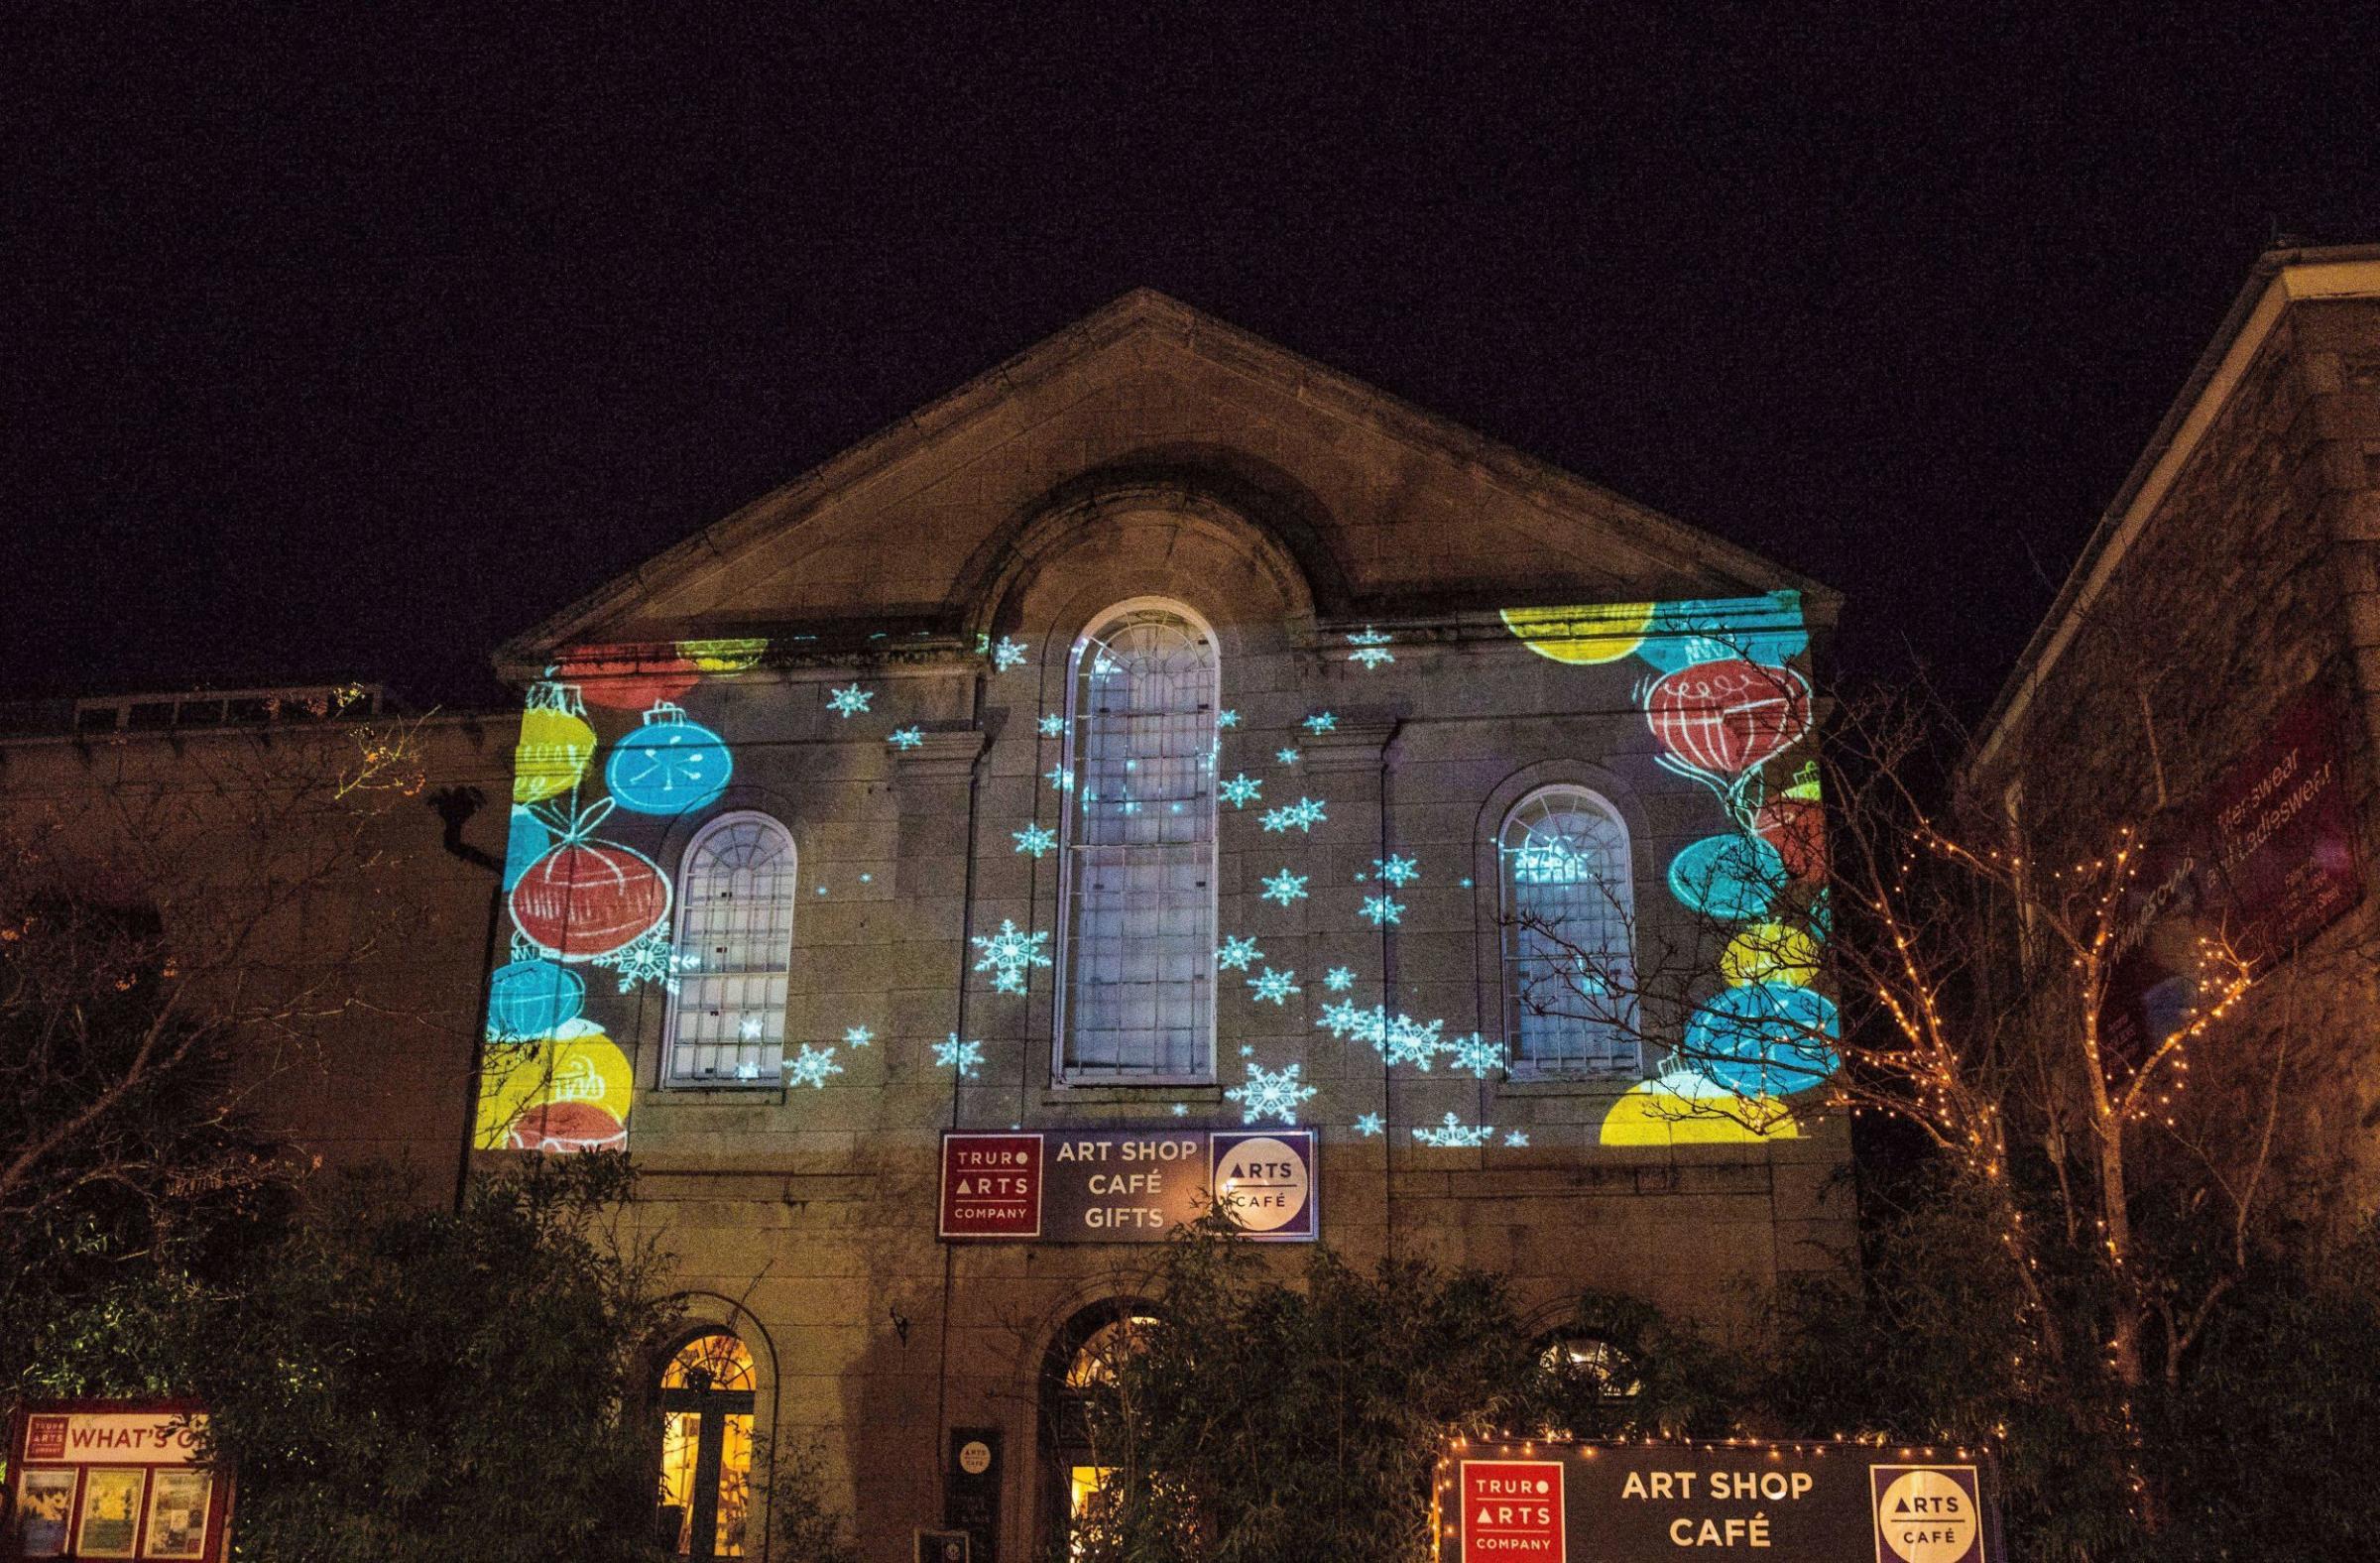 A lights projection on Truro Arts Centre